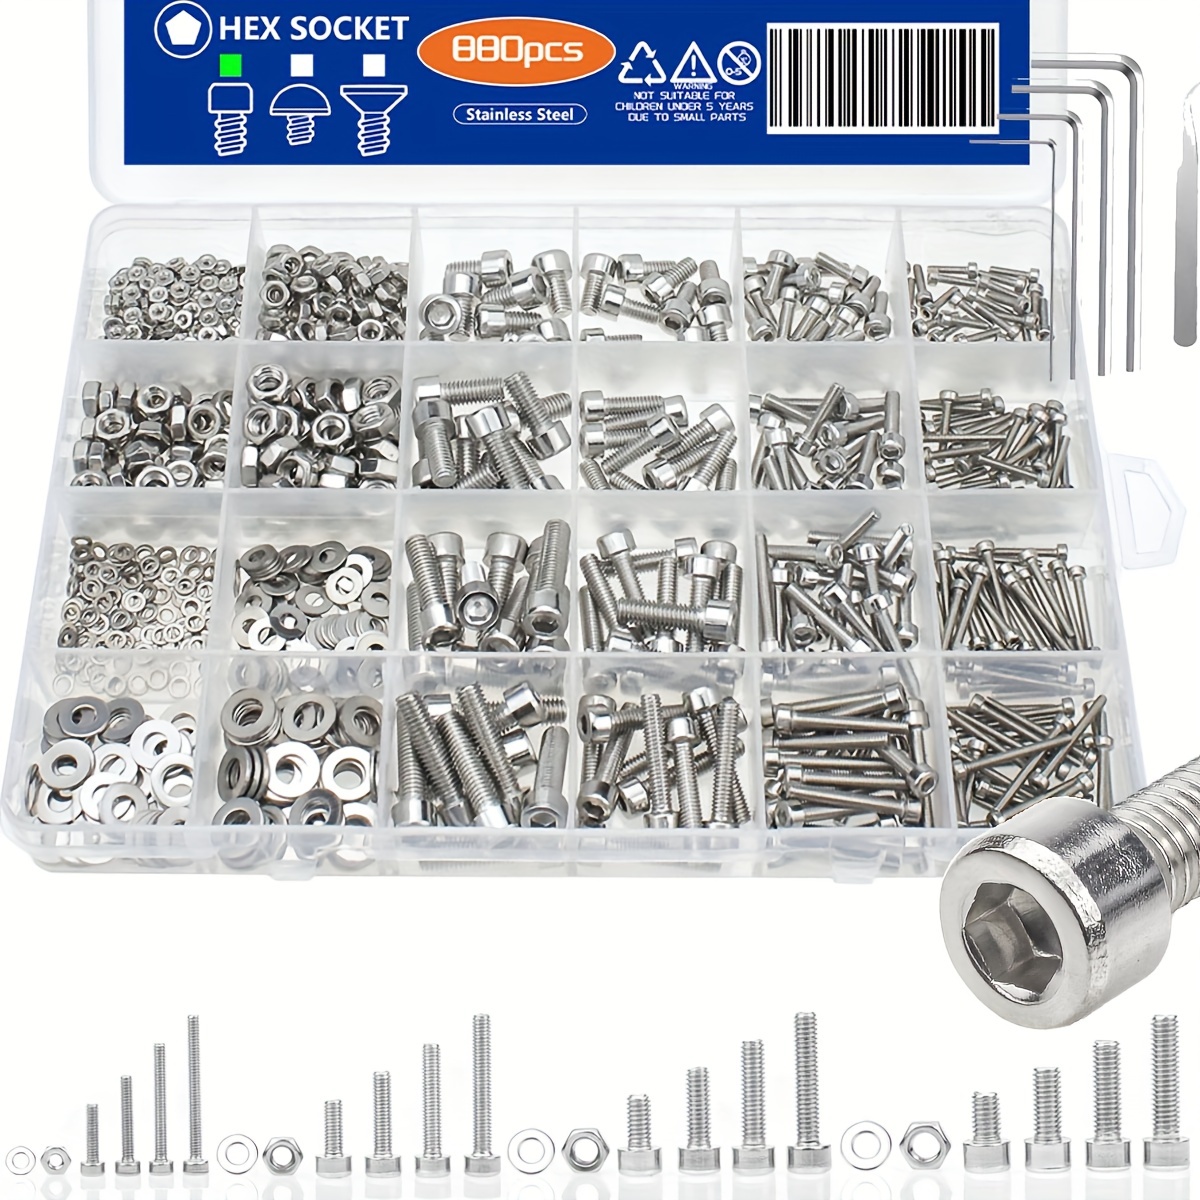 

880-piece Nuts And Bolts Assortment Kit - M2, M3, M4, M5 Hex Head Stainless Steel Bolts, Nuts, Flat Washers, And More - With Case!